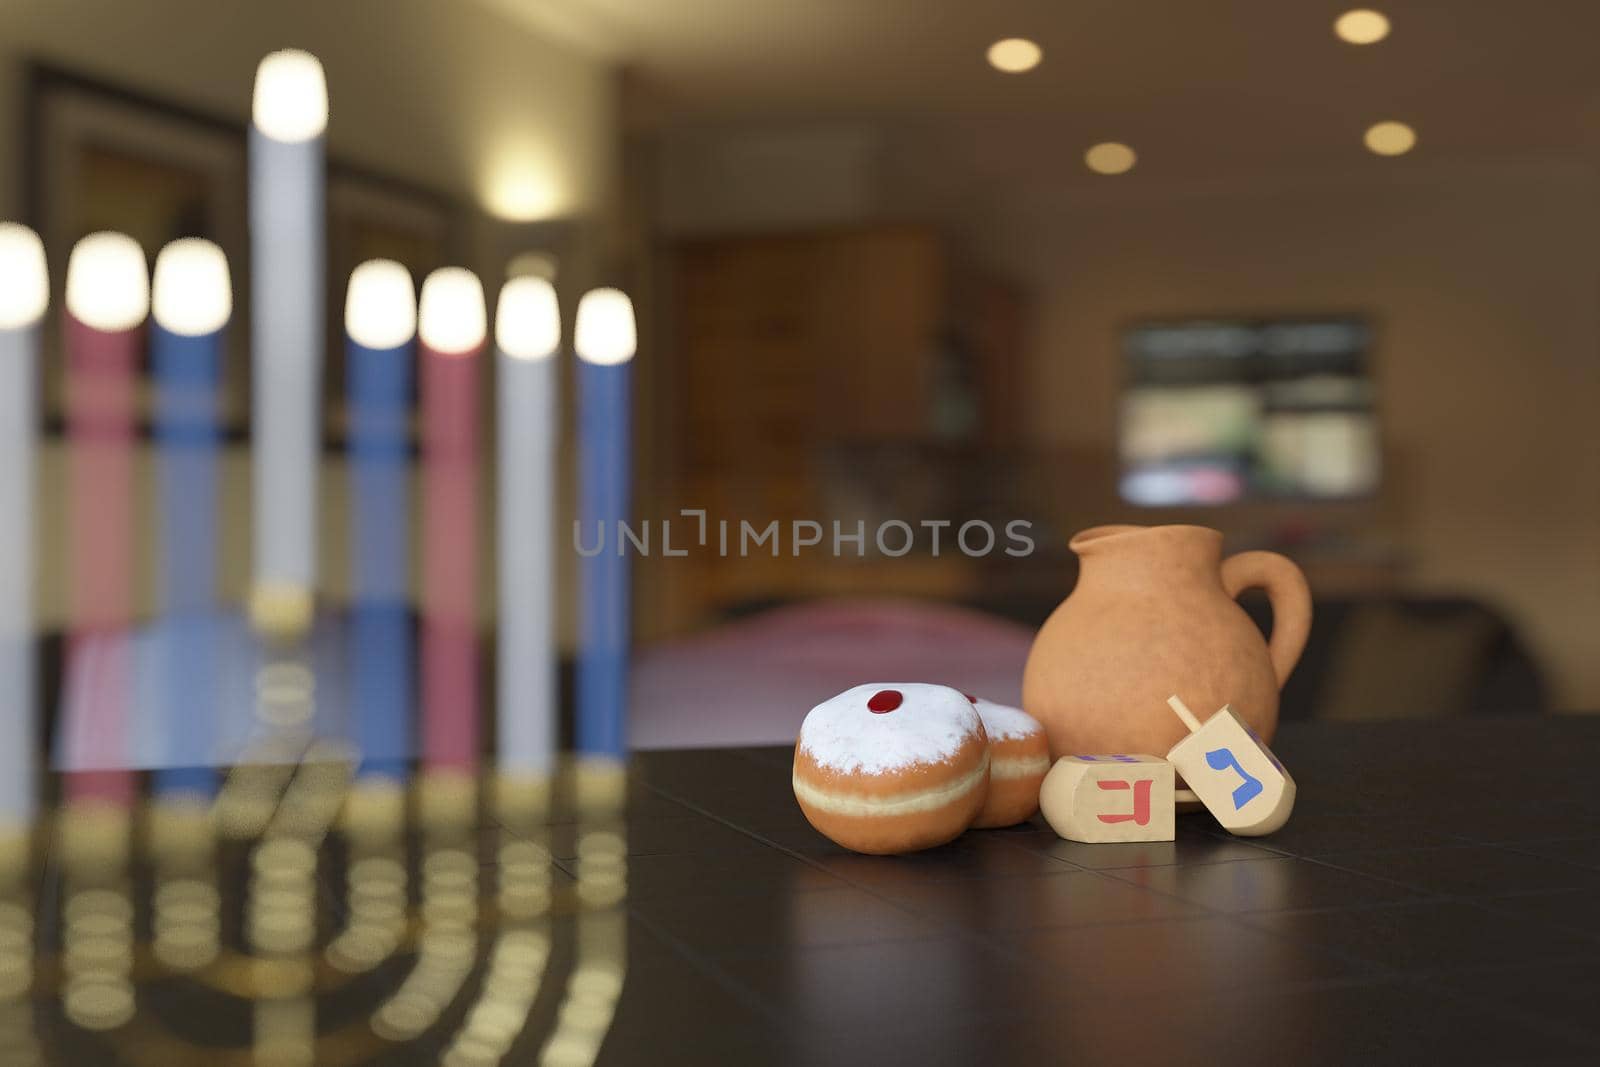 3d rendering Image of Jewish holiday Hanukkah with menorah or traditional Candelabra,gif box, jar and wooden dreidels or spinning top on a  brown background.